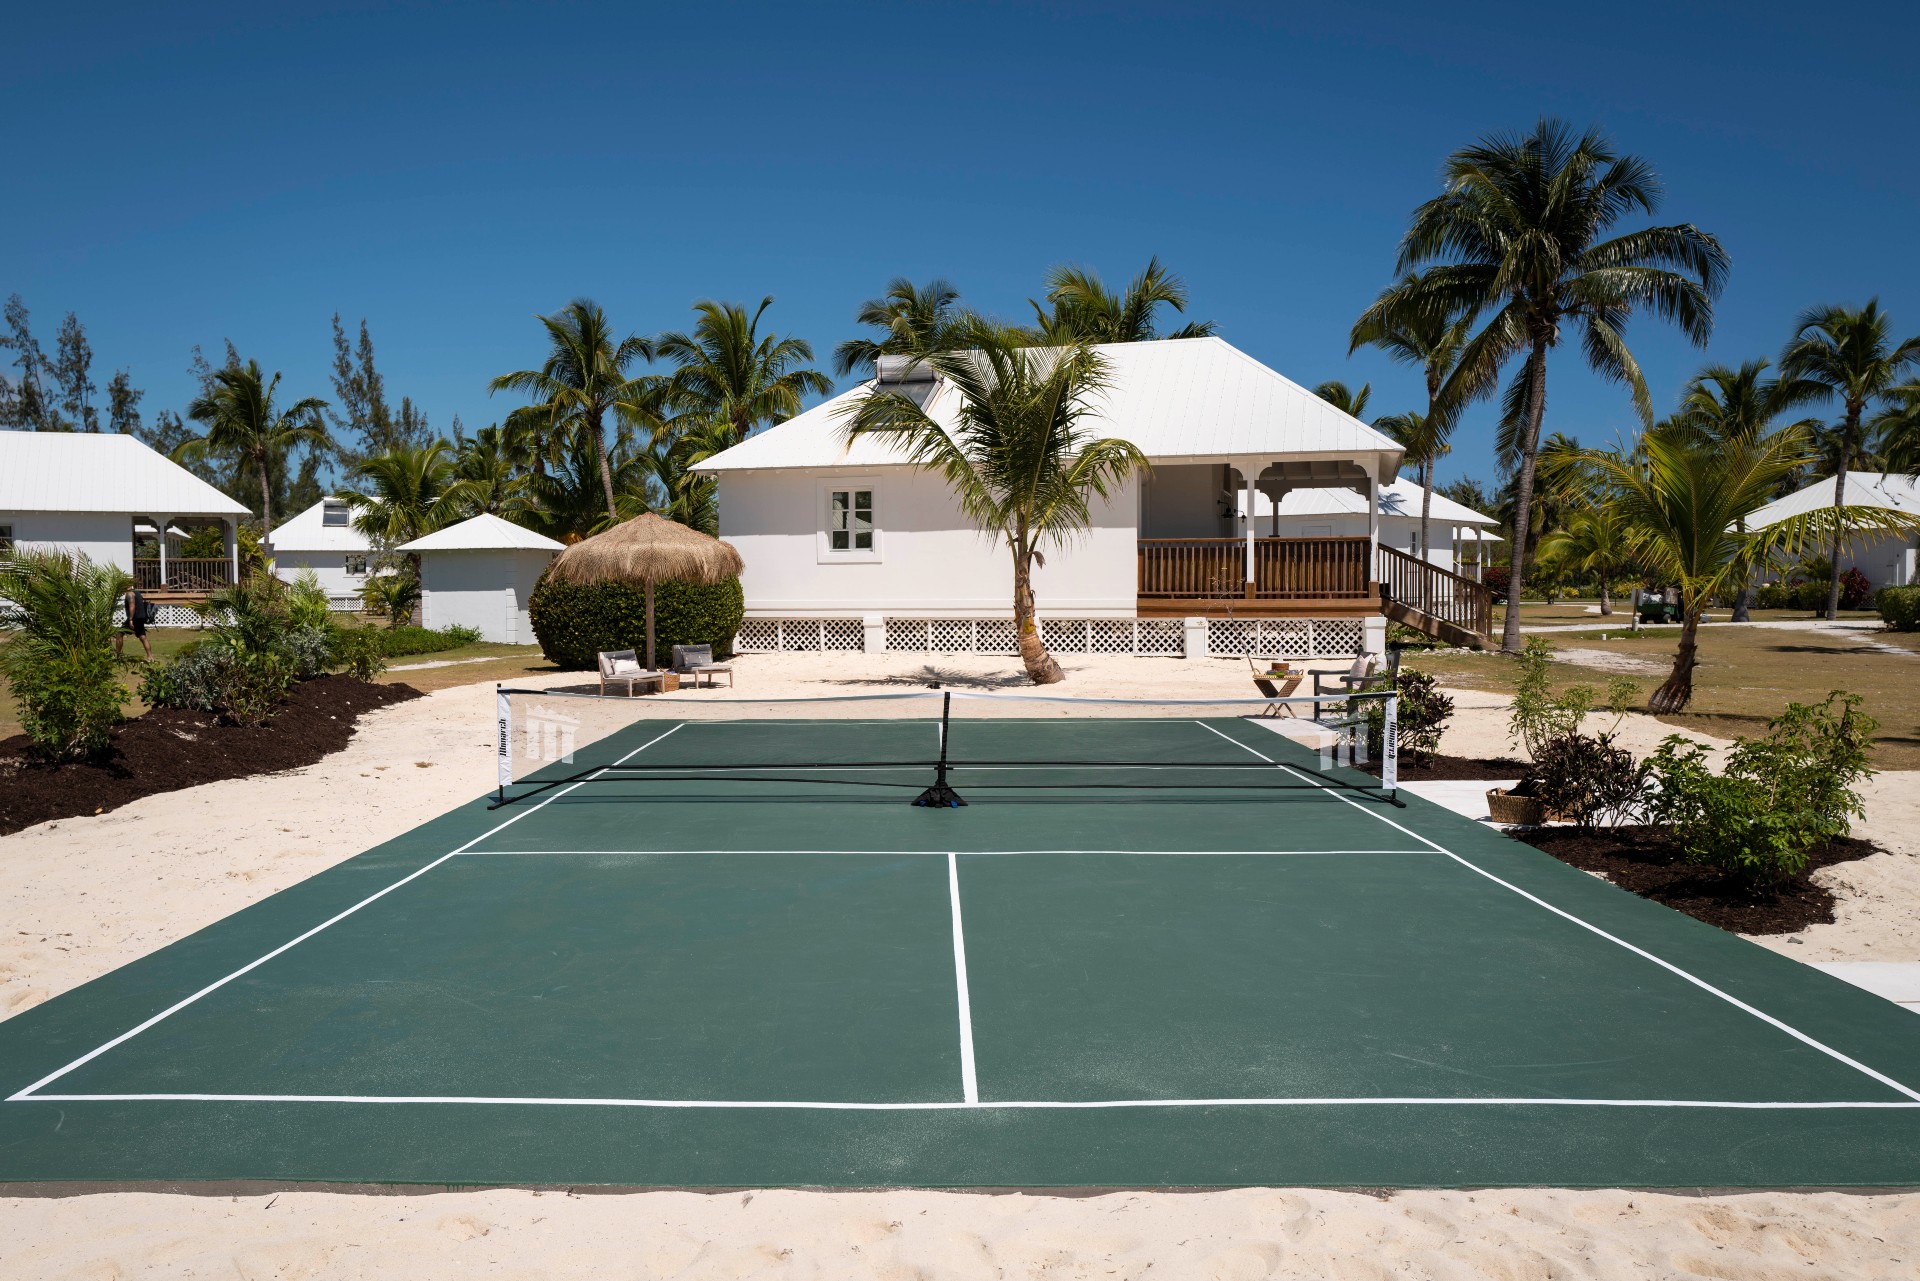 Resort sport court with palm trees